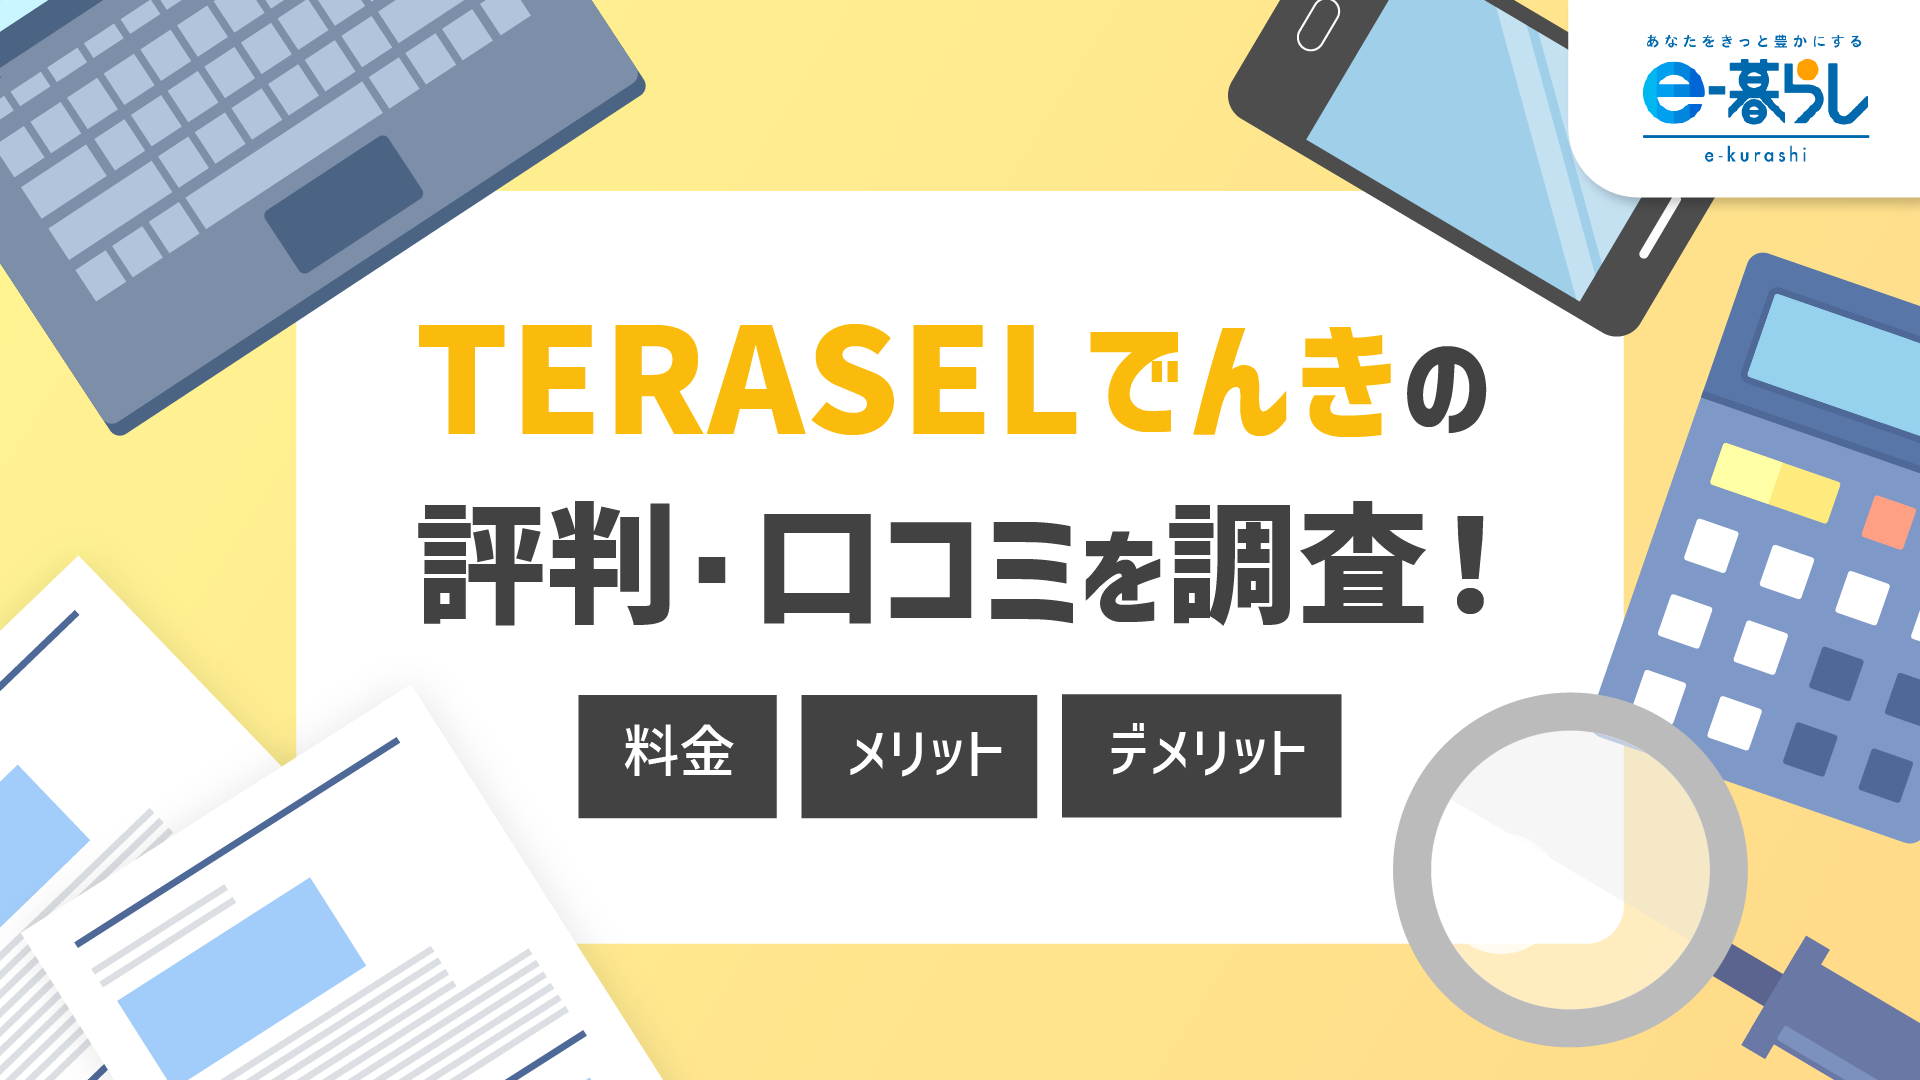 TERASELでんきの評判・口コミを調査！料金とメリット・デメリット